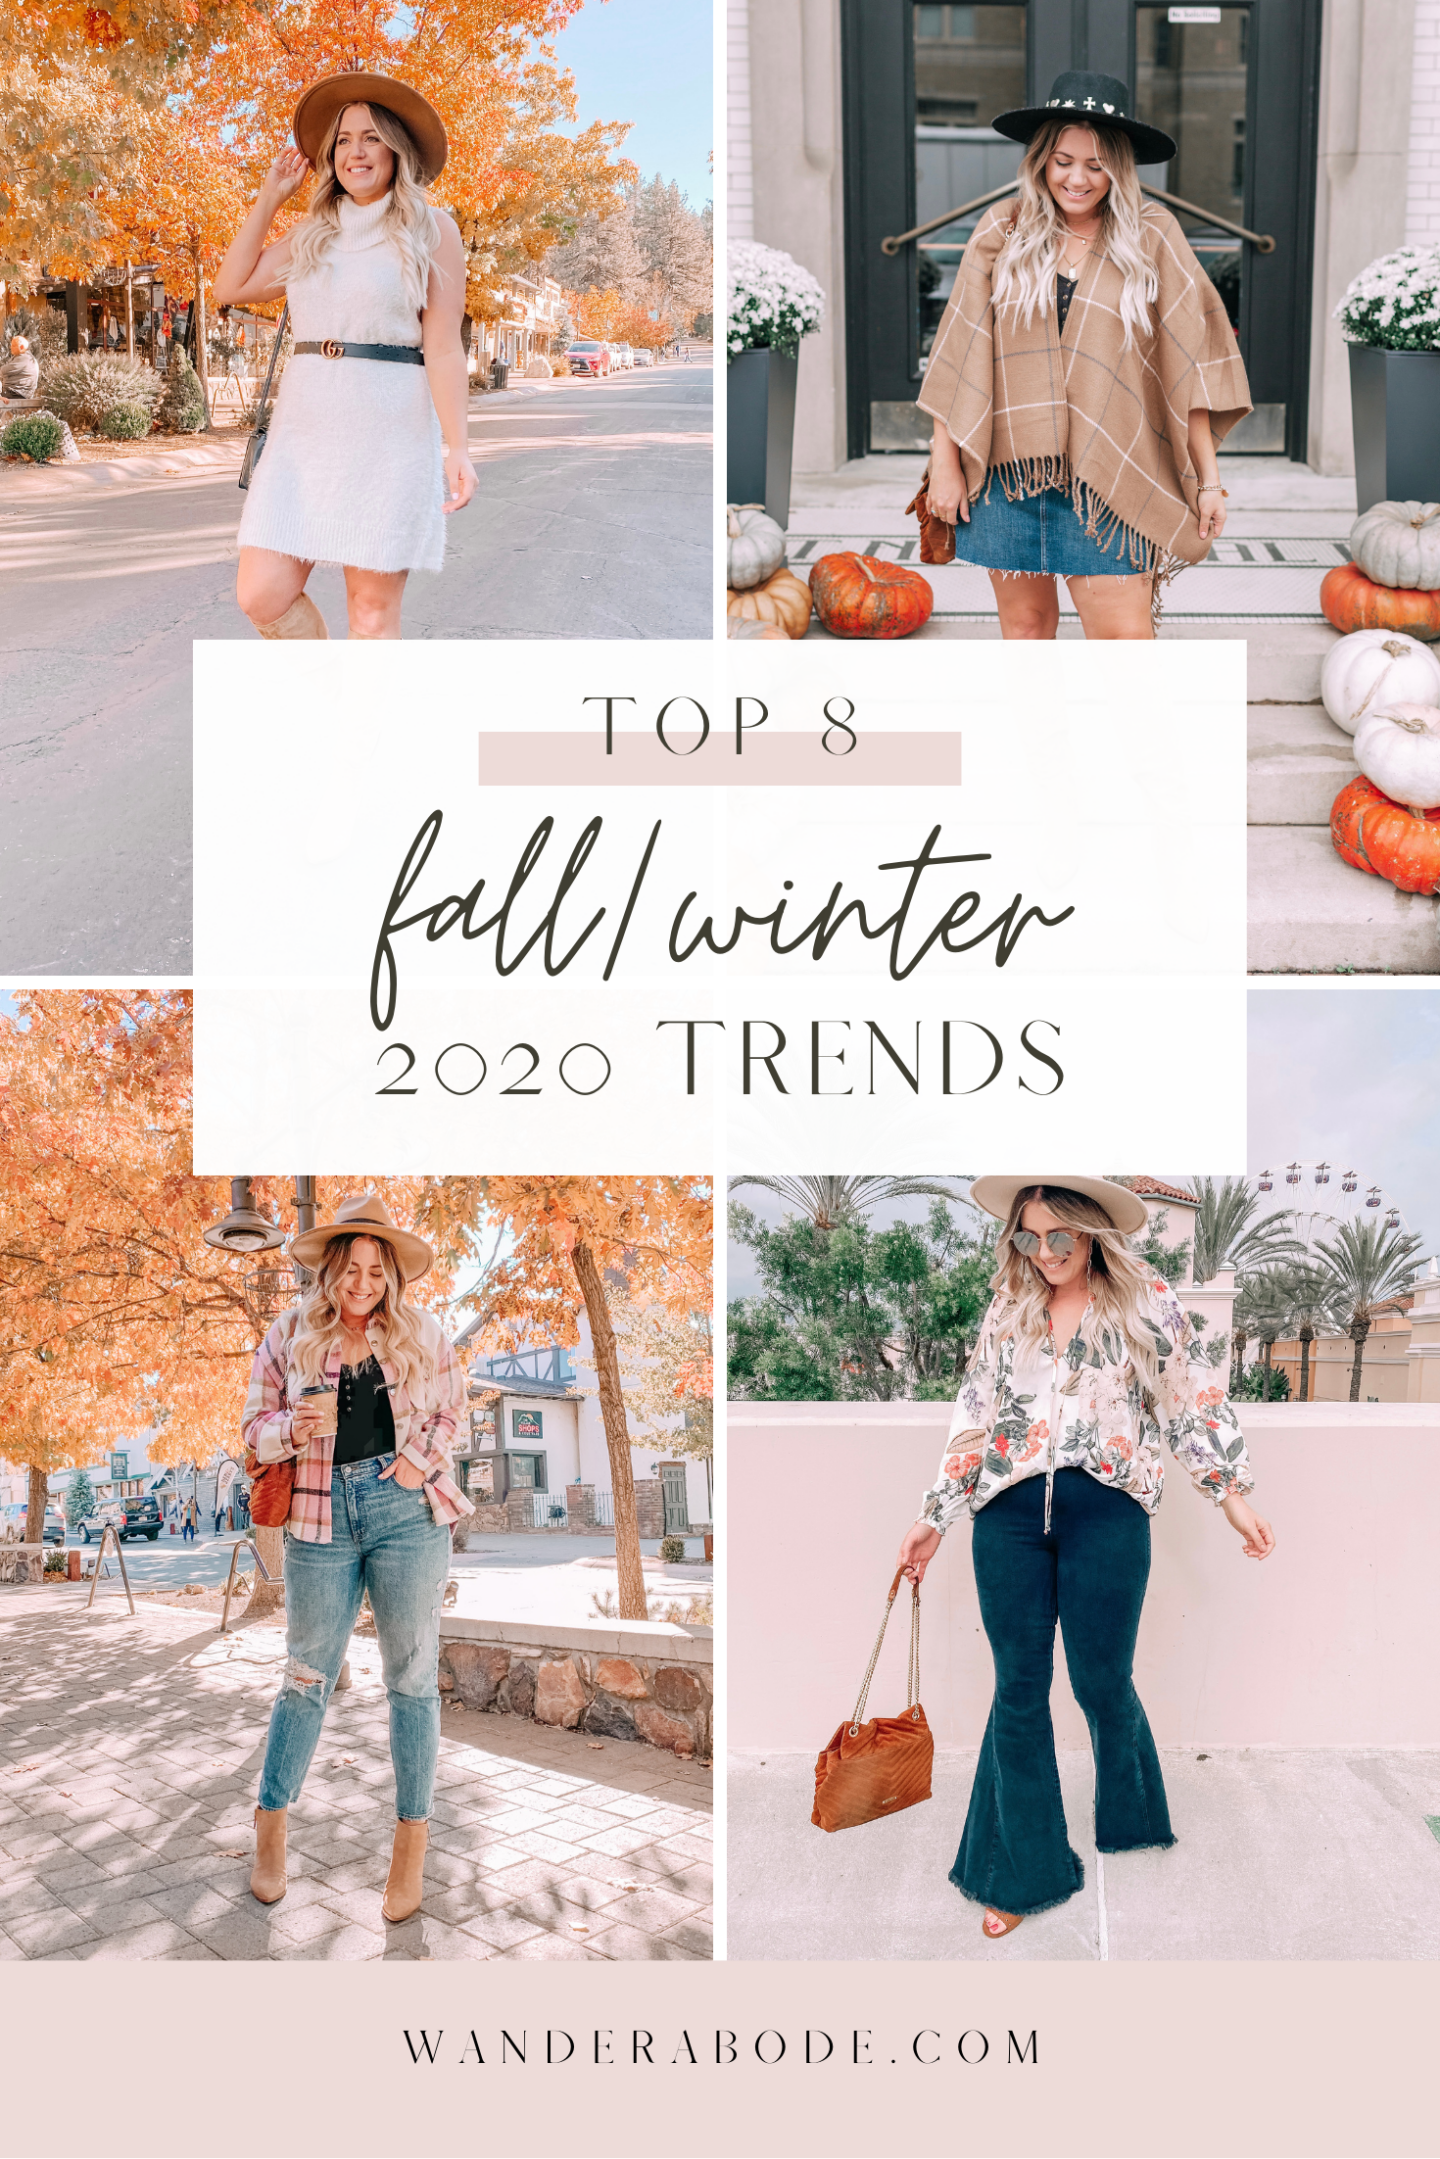 TOP 8 FALL/WINTER 2020 TRENDS